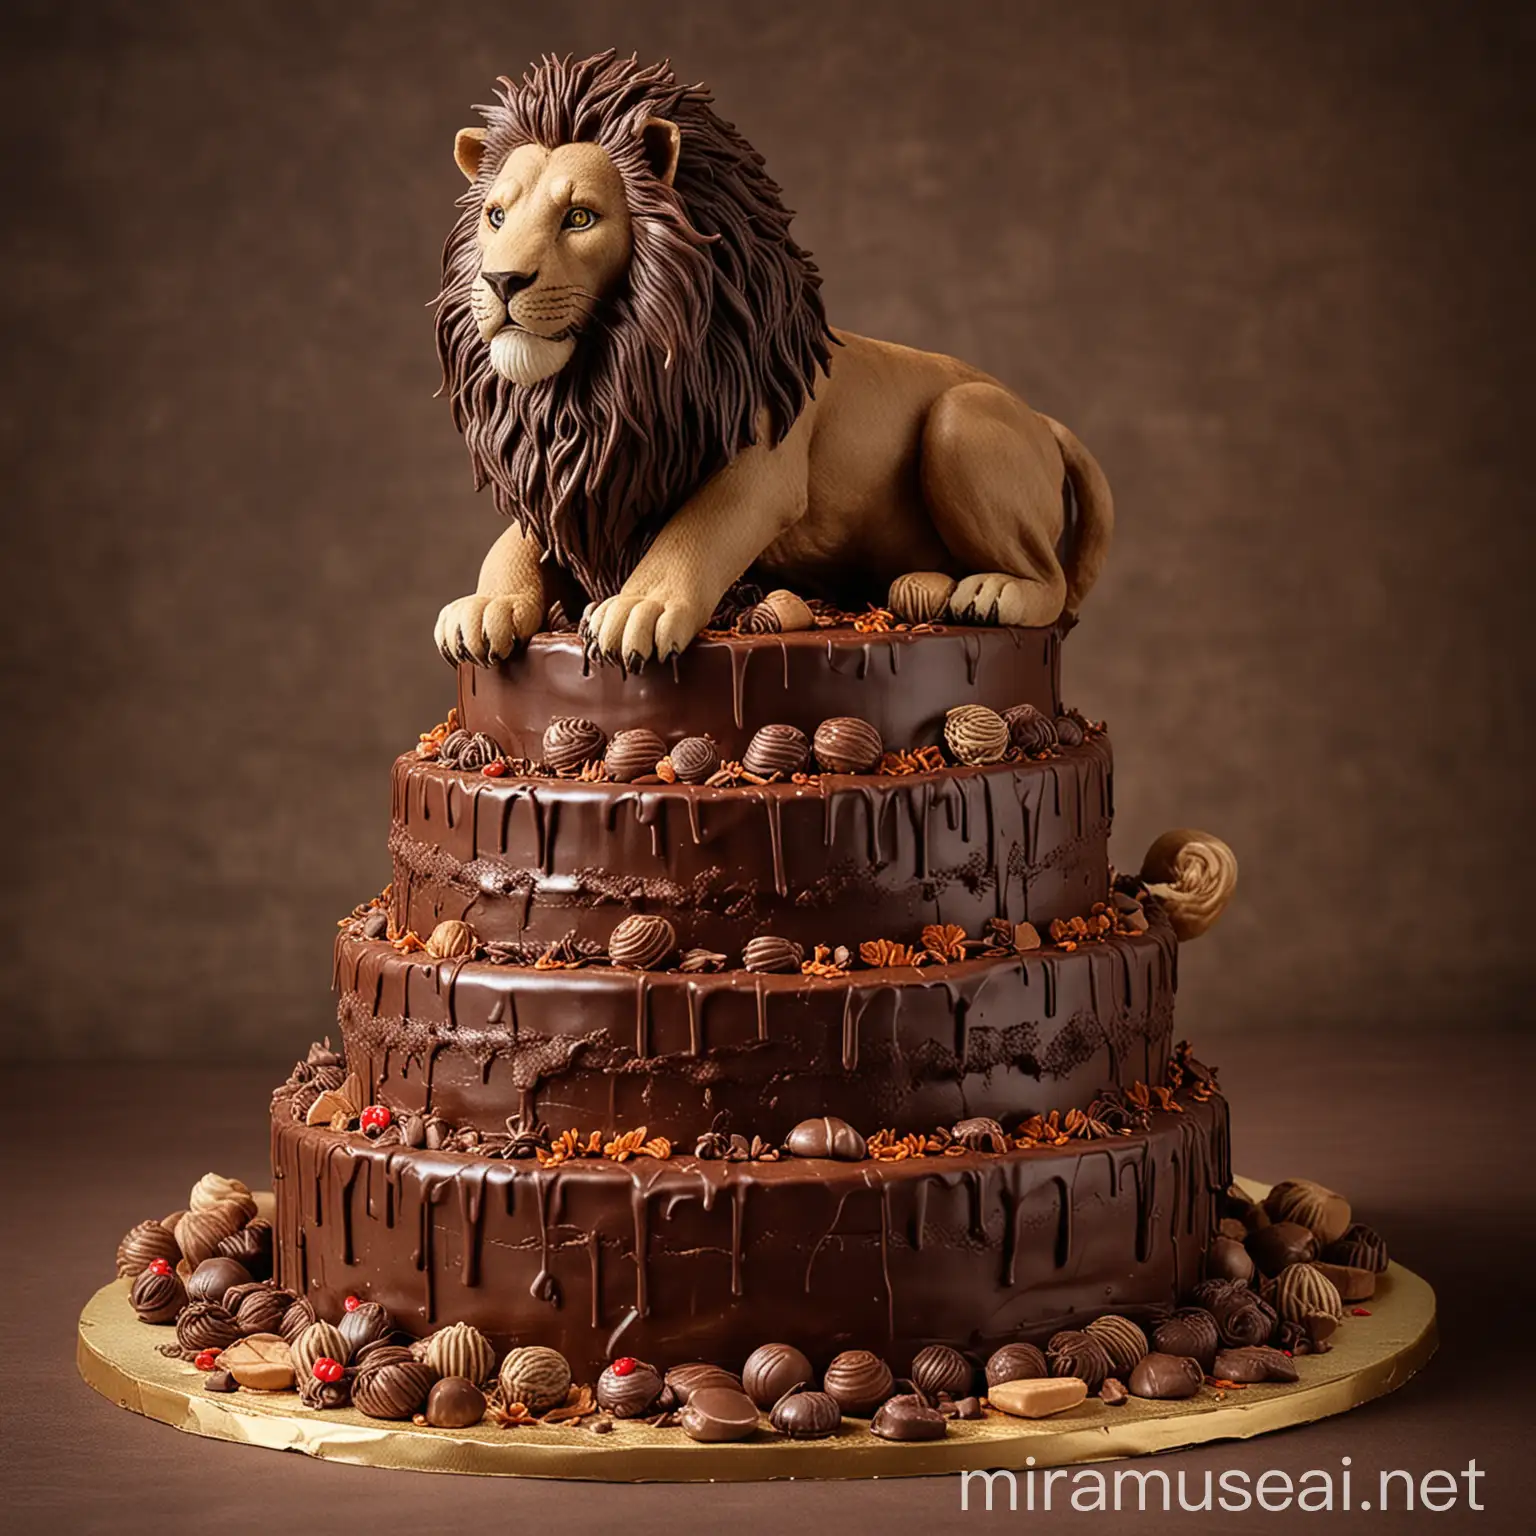 ThreeTier Chocolate Cake Confronted by Hungry Lion